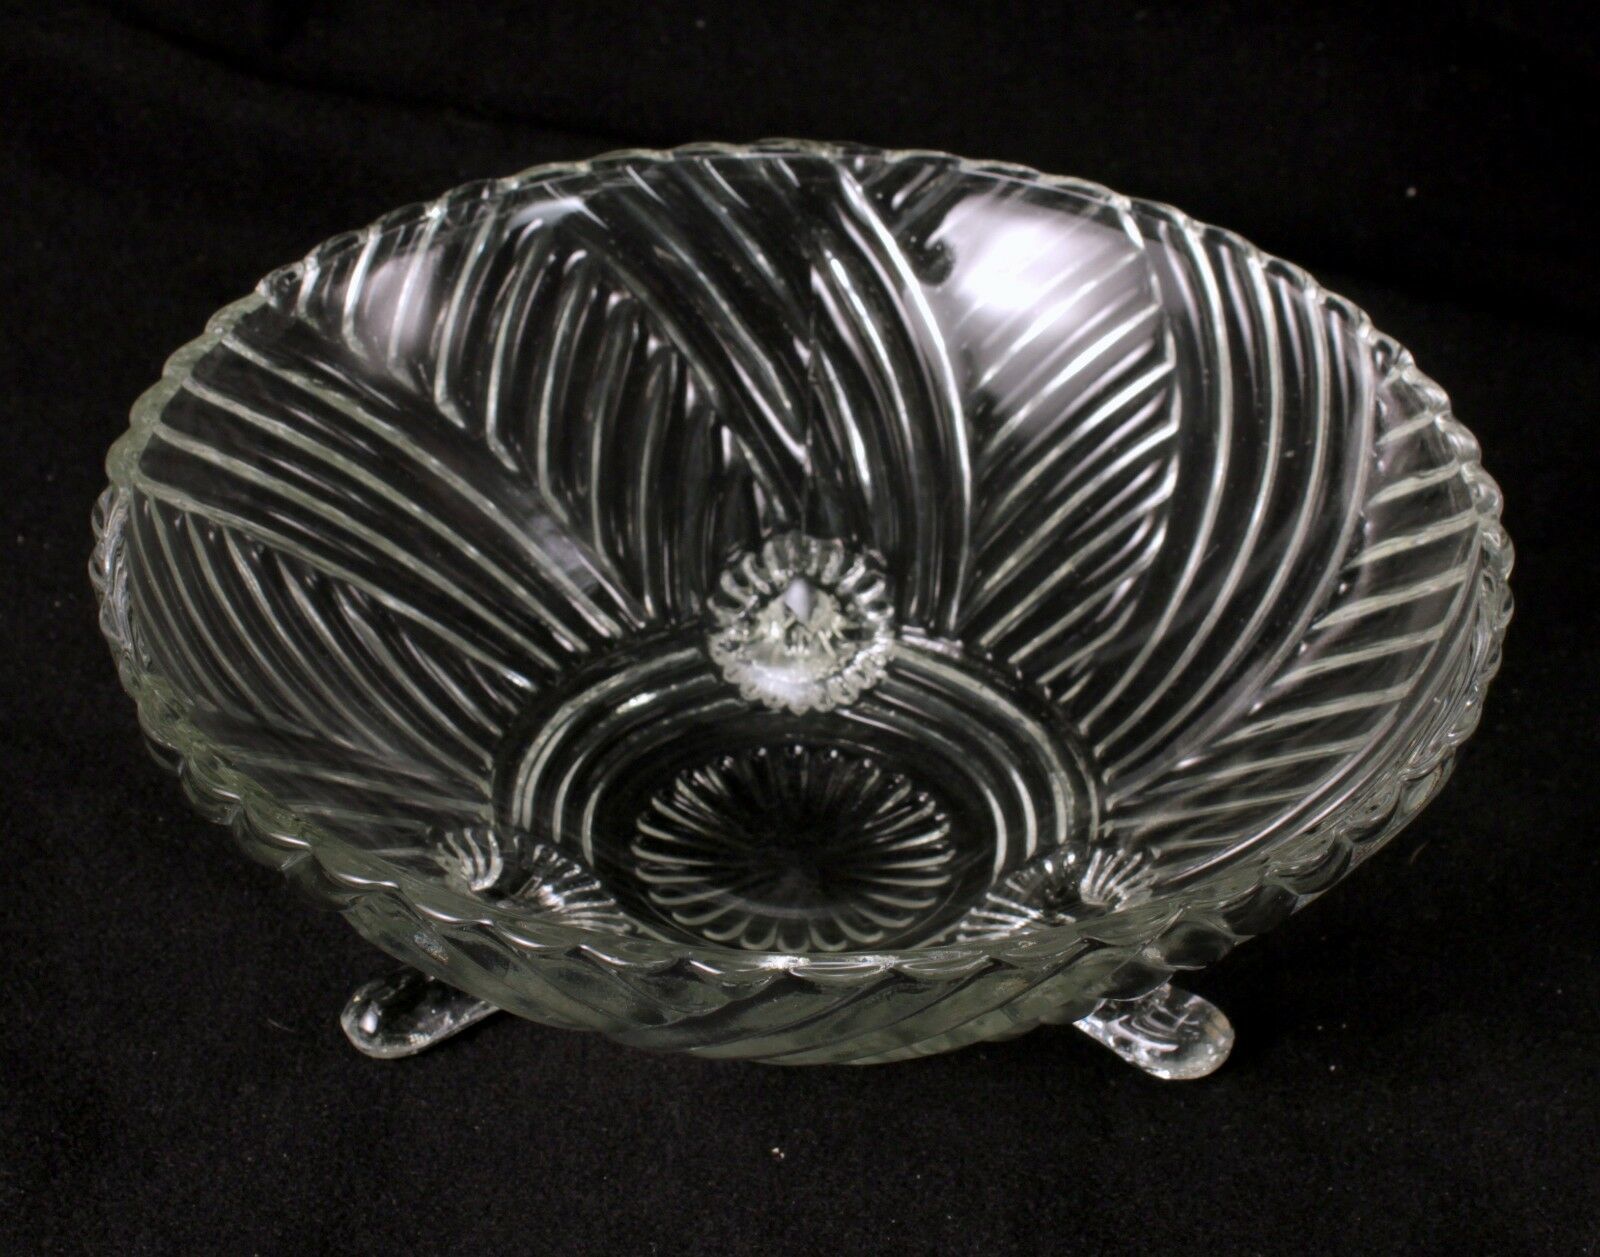 Primary image for Anchor Hocking AHC60 Clear Glass Serving Bowl 8.5 Inches Diameter 3 Footed